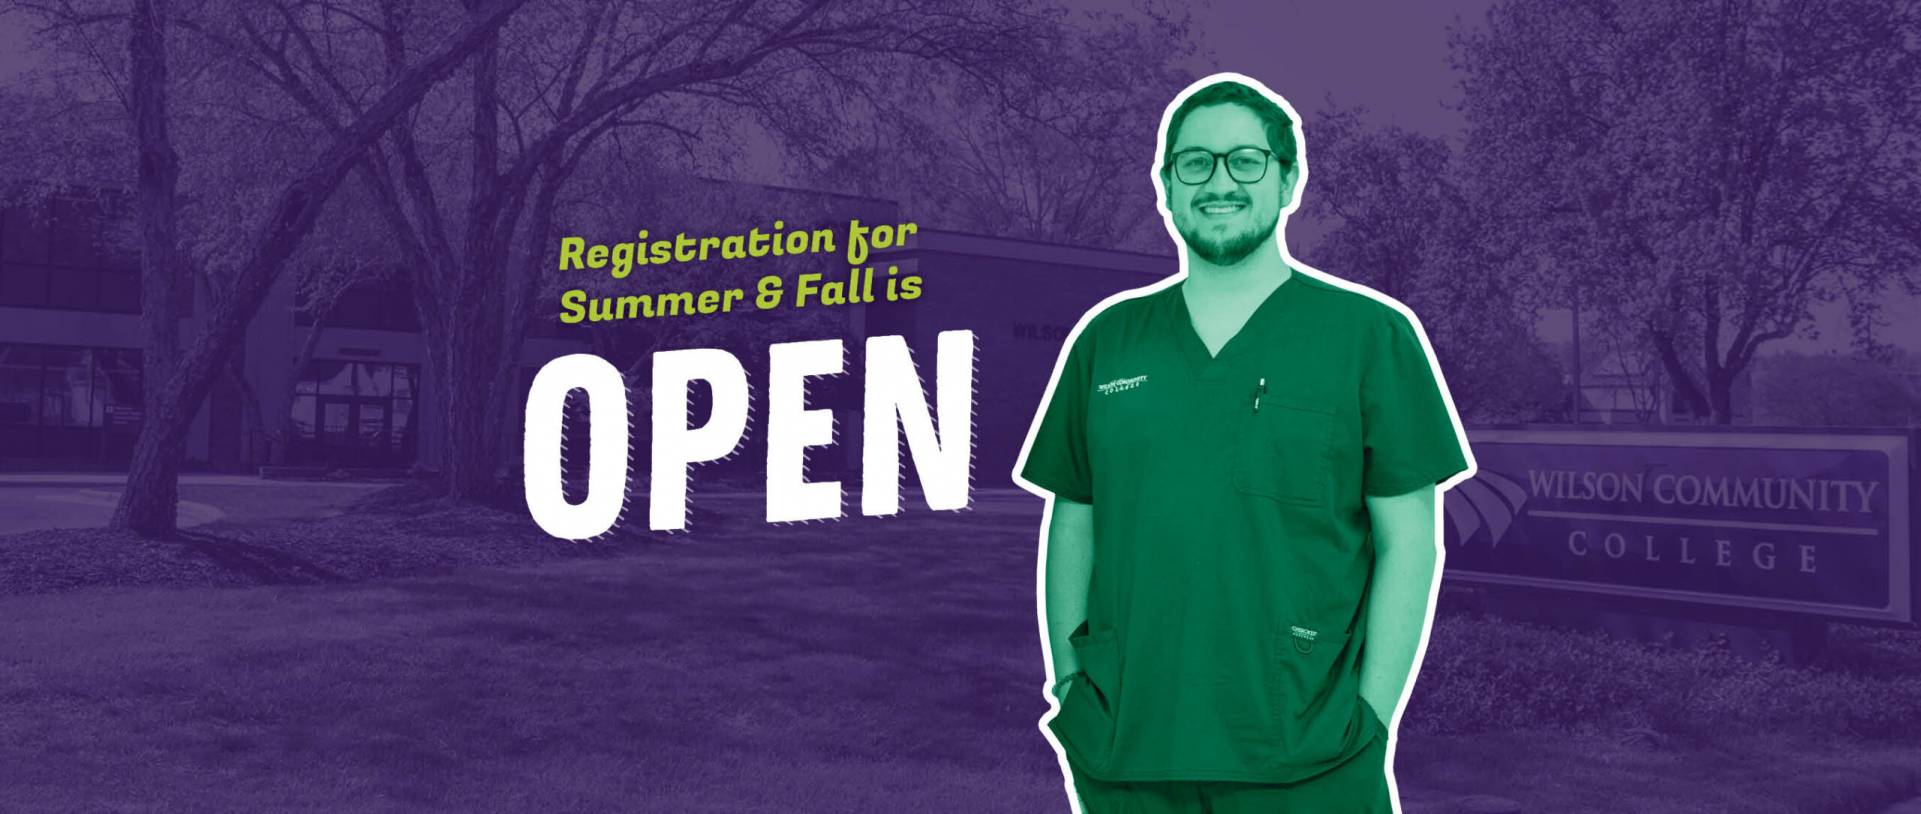 Registration for Summer & Fall is OPEN